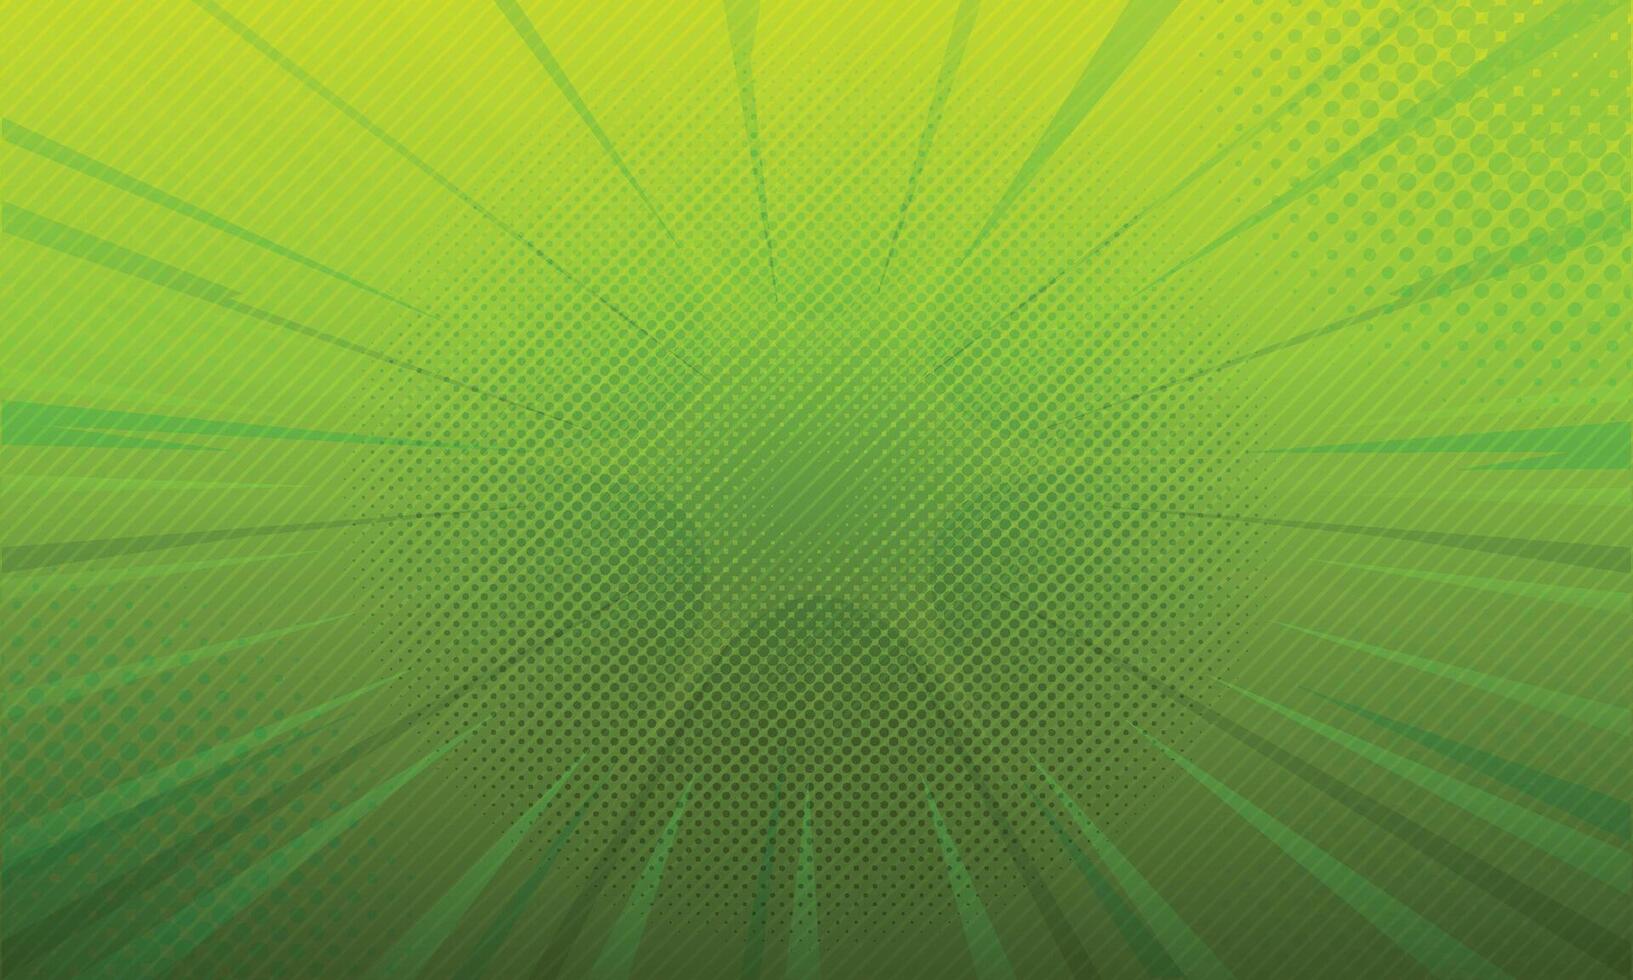 vector flat design green comic style background